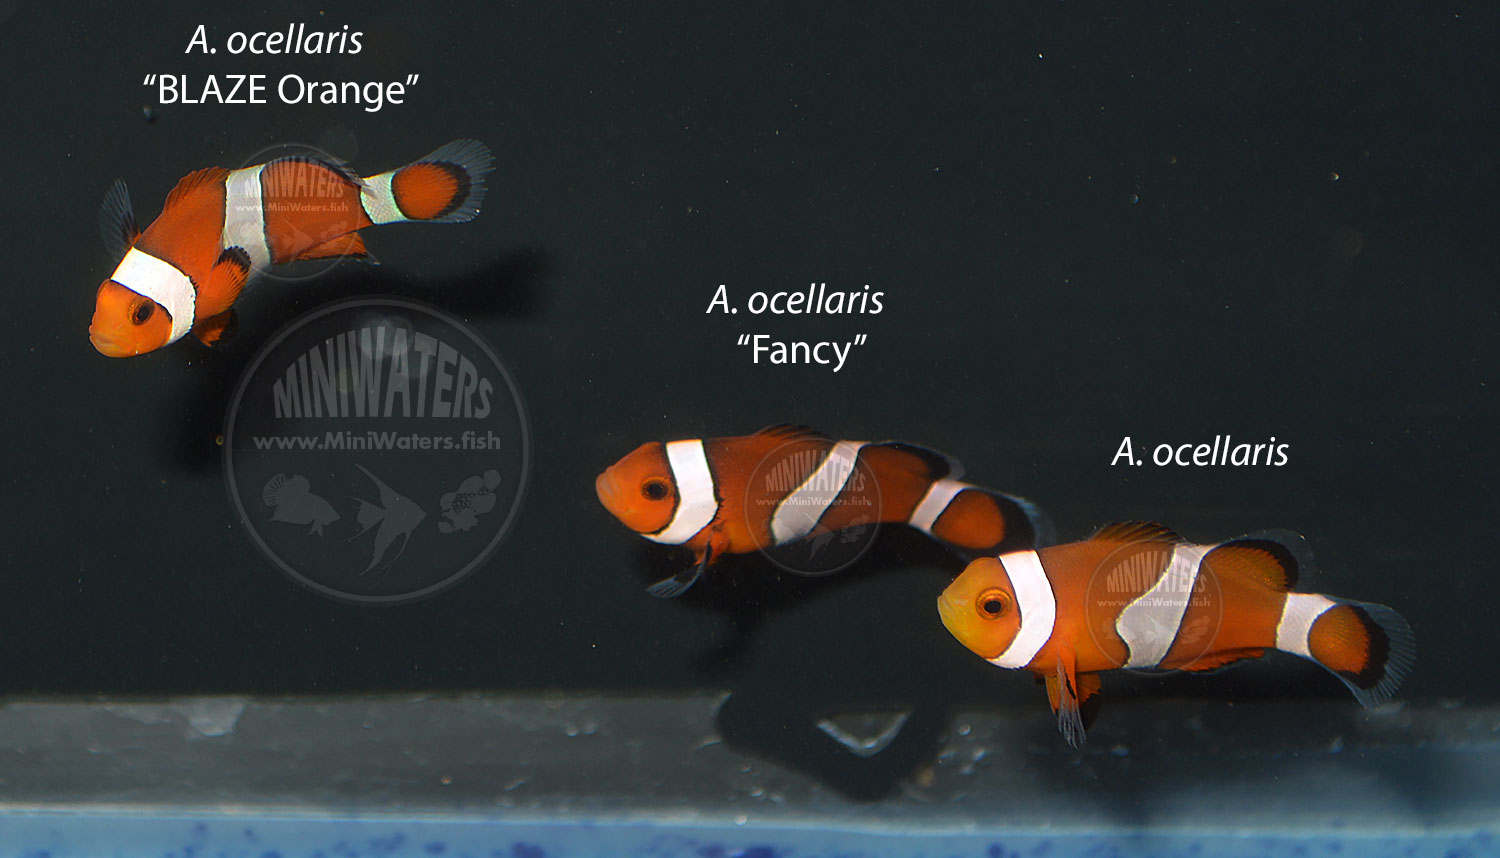 Another look at the classic orange Ocellaris Clownfish, along with two derived strains (Fancy Ocellaris and Blaze Orange)